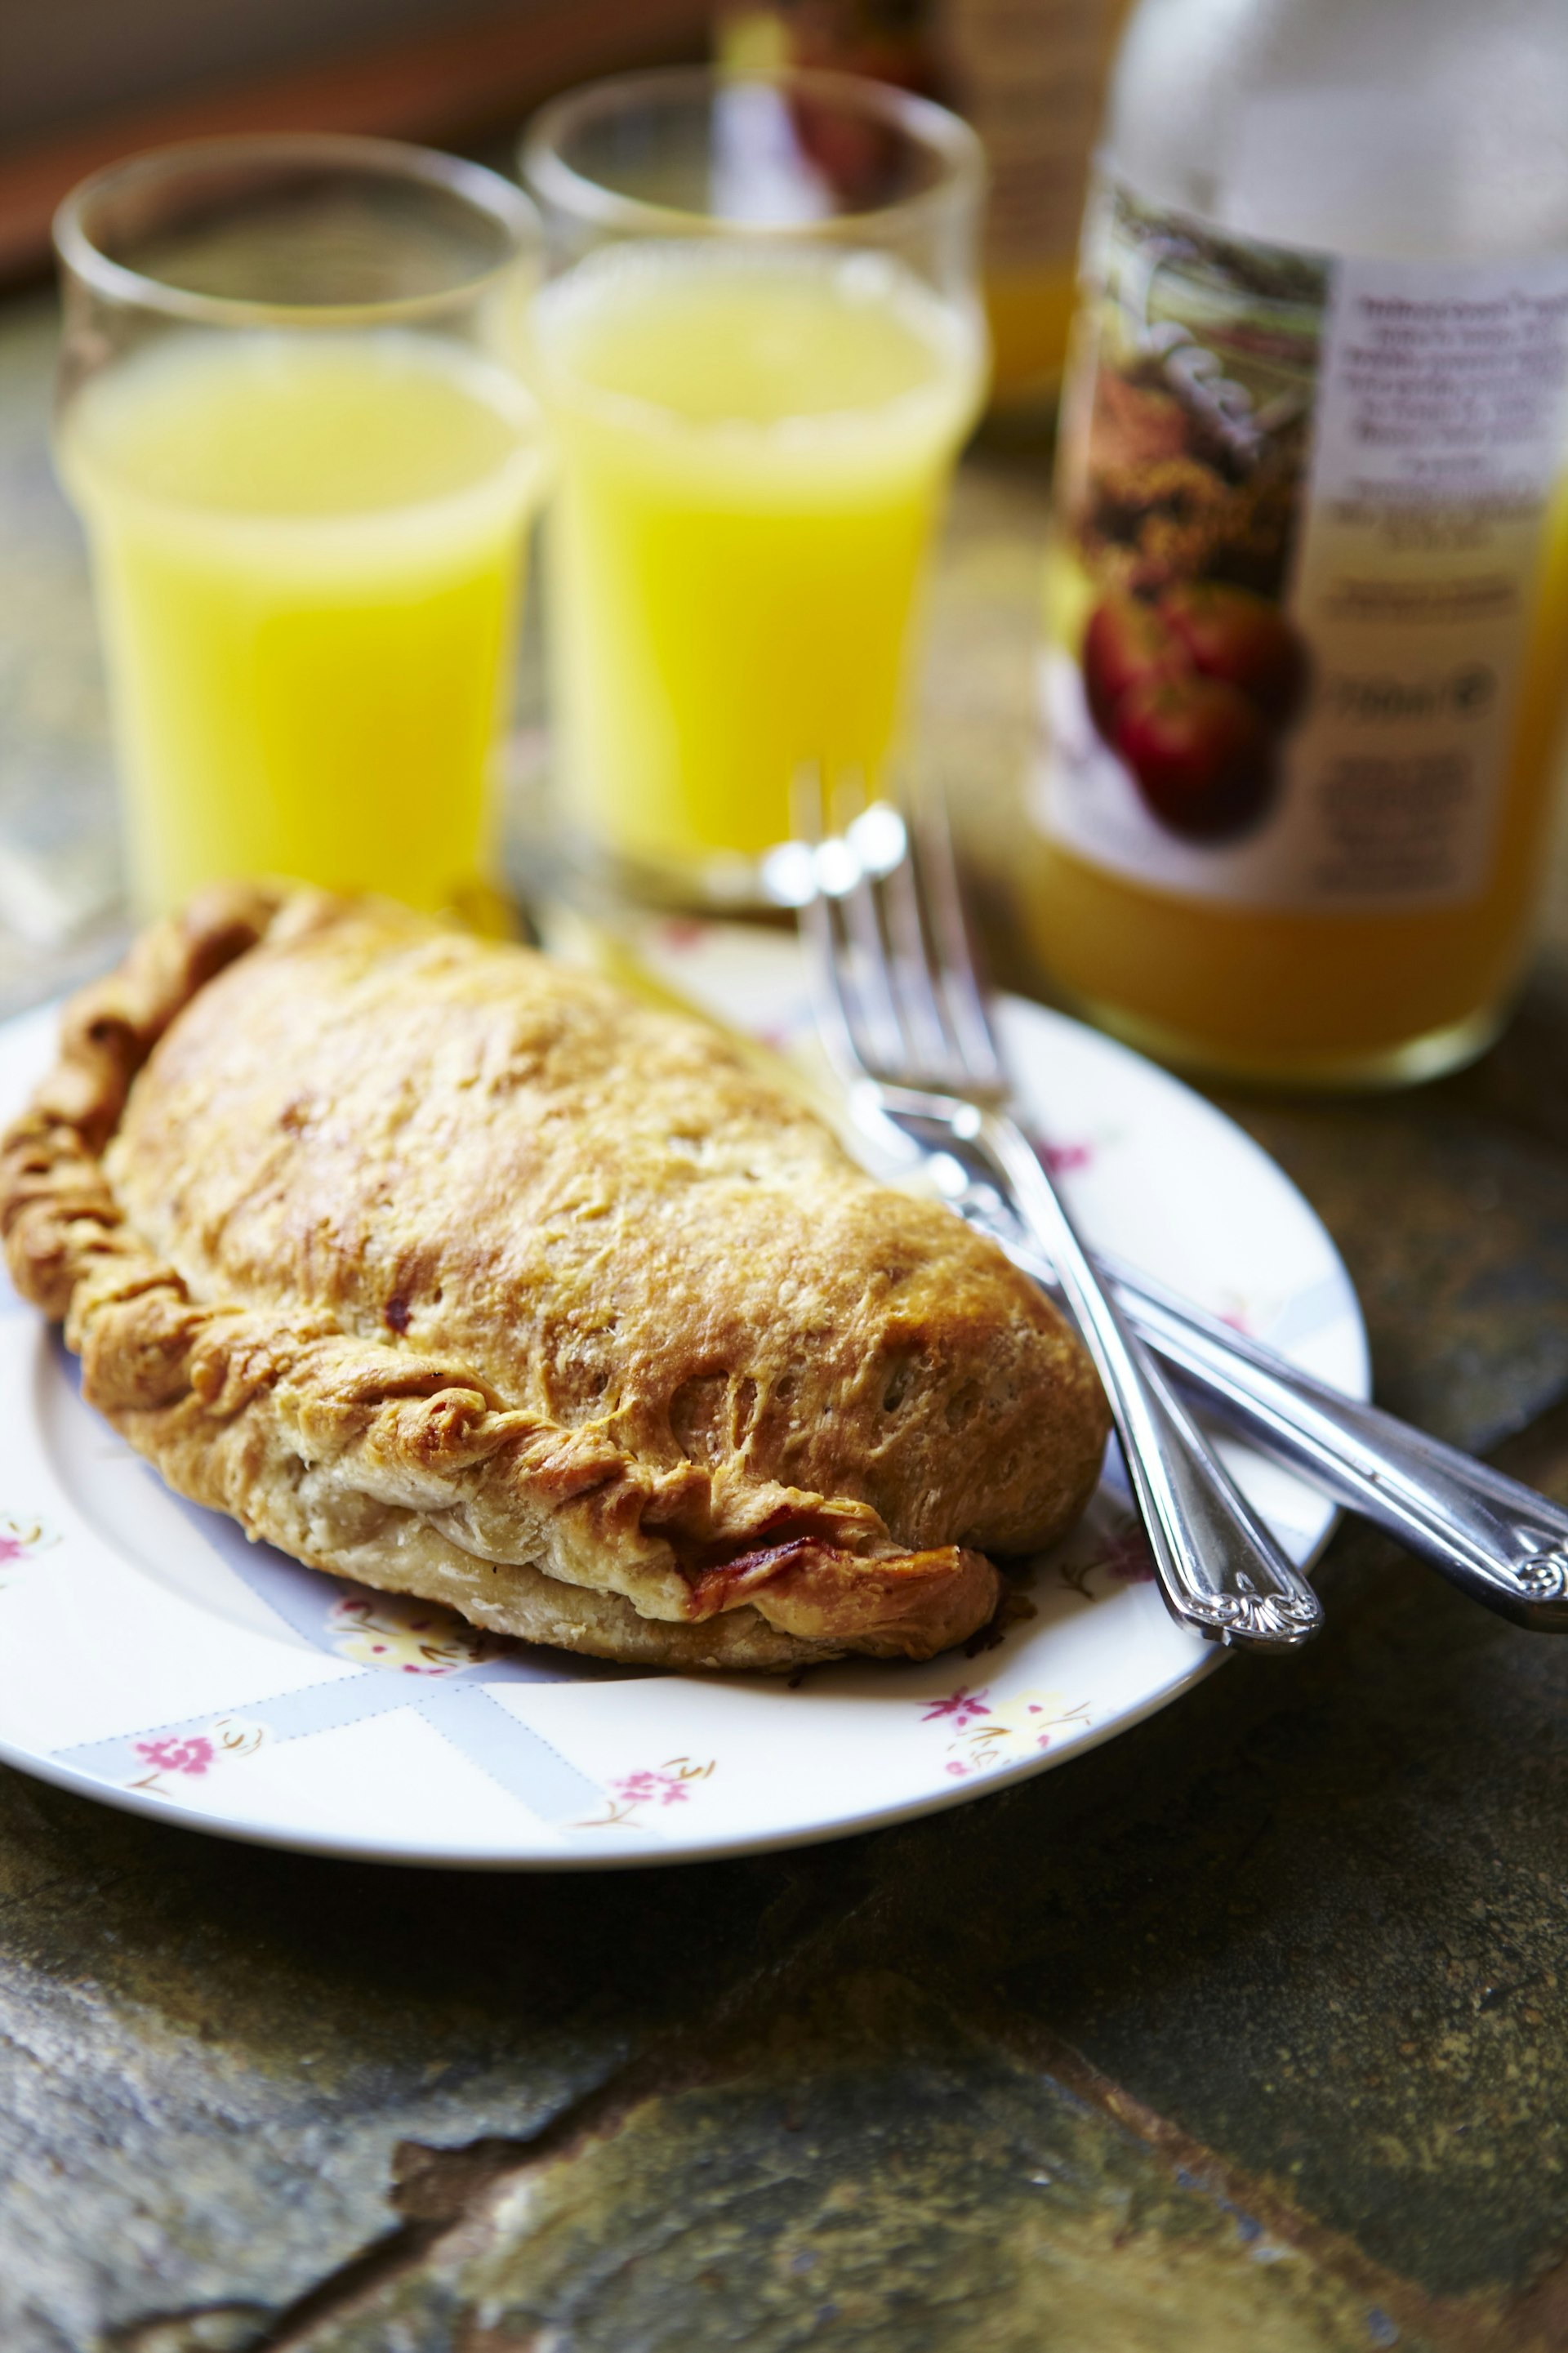 A traditional Cornish pasty on a plate with two glasses of orange juice beside it. The pasty is a baked pastry and filled with potato, meat and vegetables.